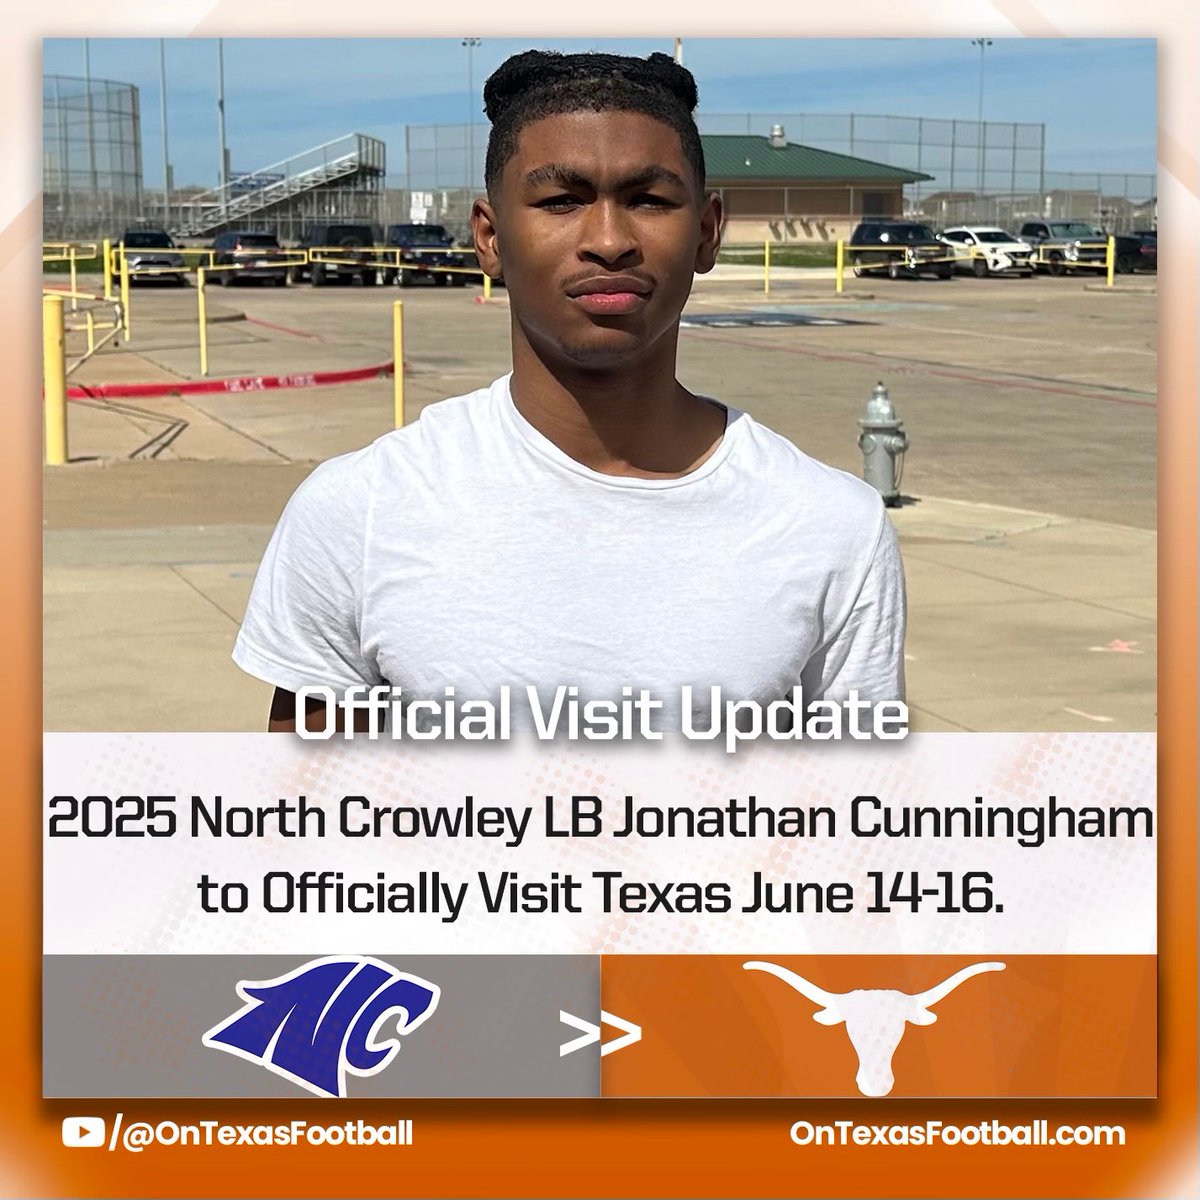 North Crowley LB and OnTexasFootball 4-Star @Deucethegreat4 has locked in his official visit to Texas. OnTexasFootball: ontexasfootball.com OnTexasFootball YouTube: m.youtube.com/@OnTexasFootba…